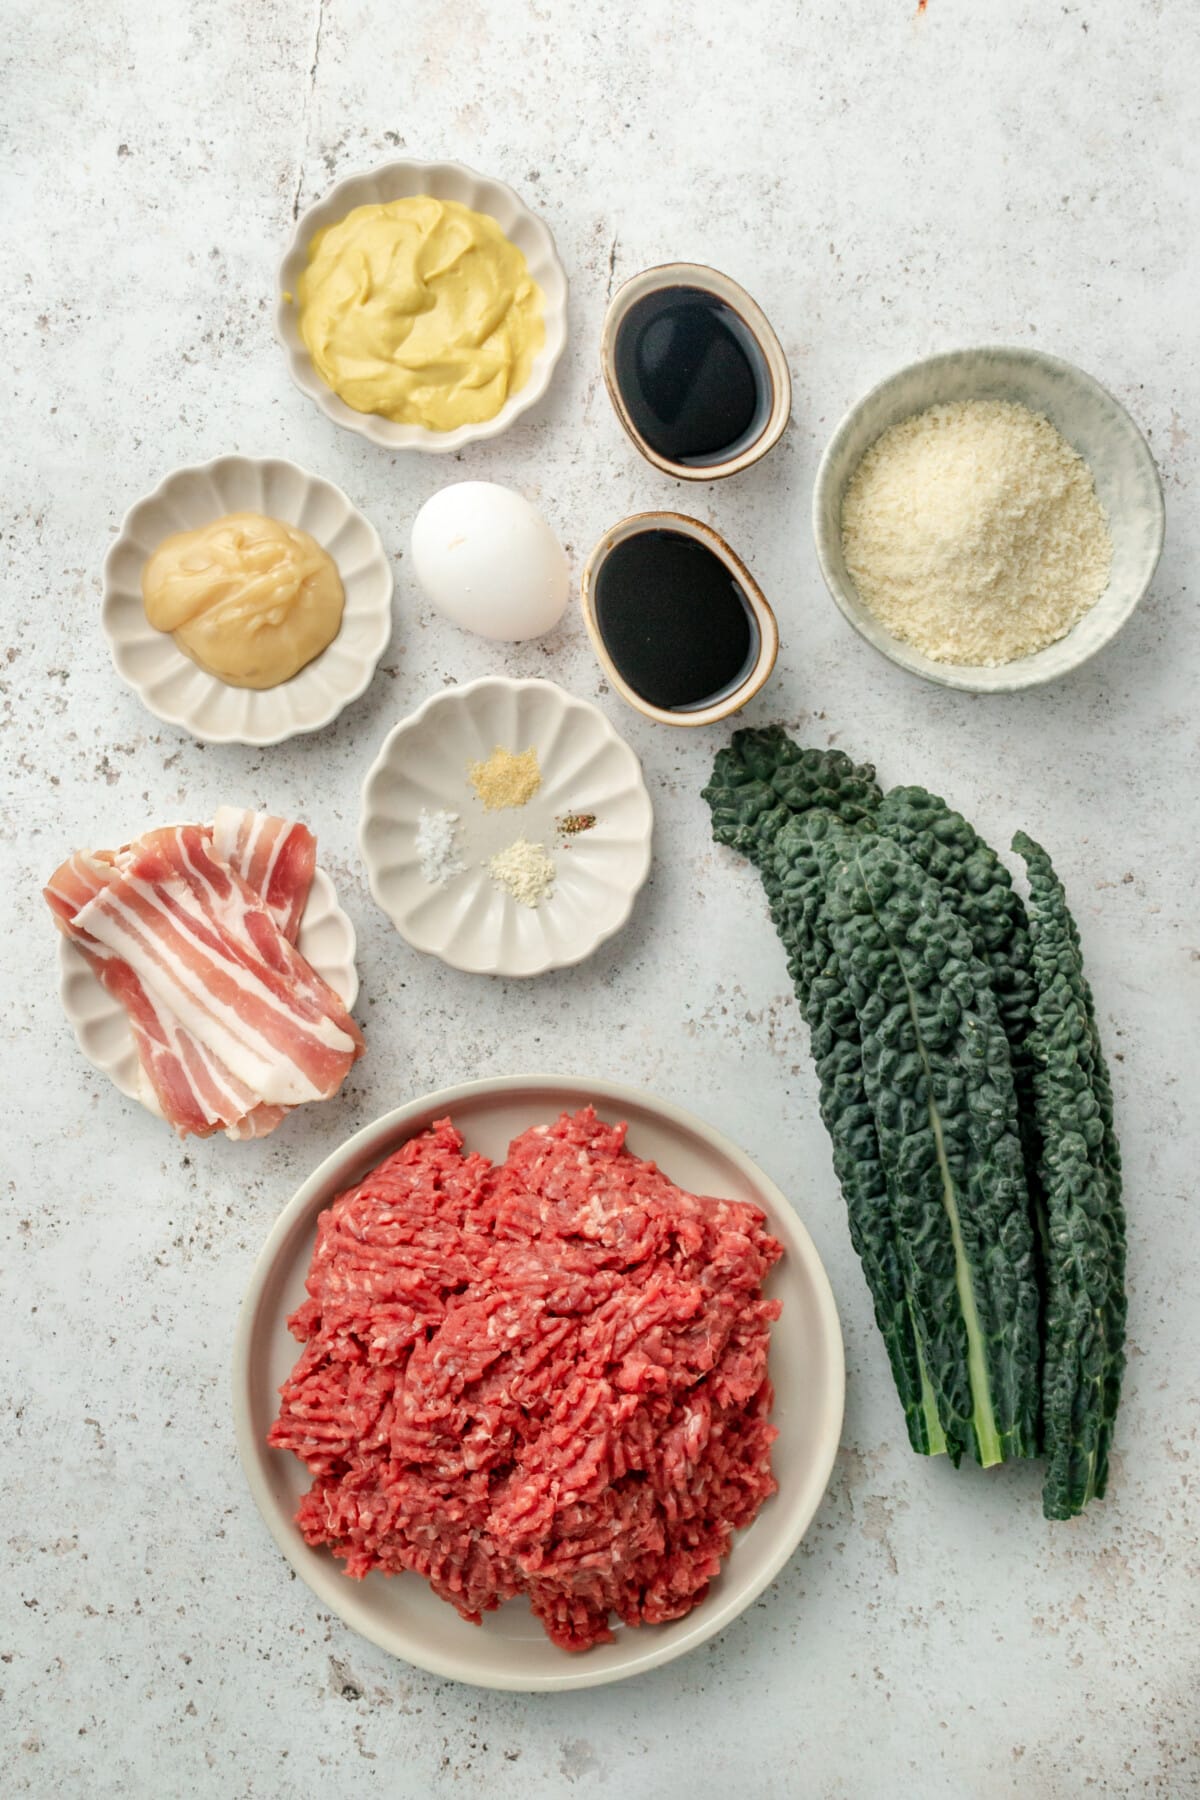 Ingredients for mini meatloaves with balsamic glaze are laid out in a variety of small plates and bowls on a light grey colored surface.